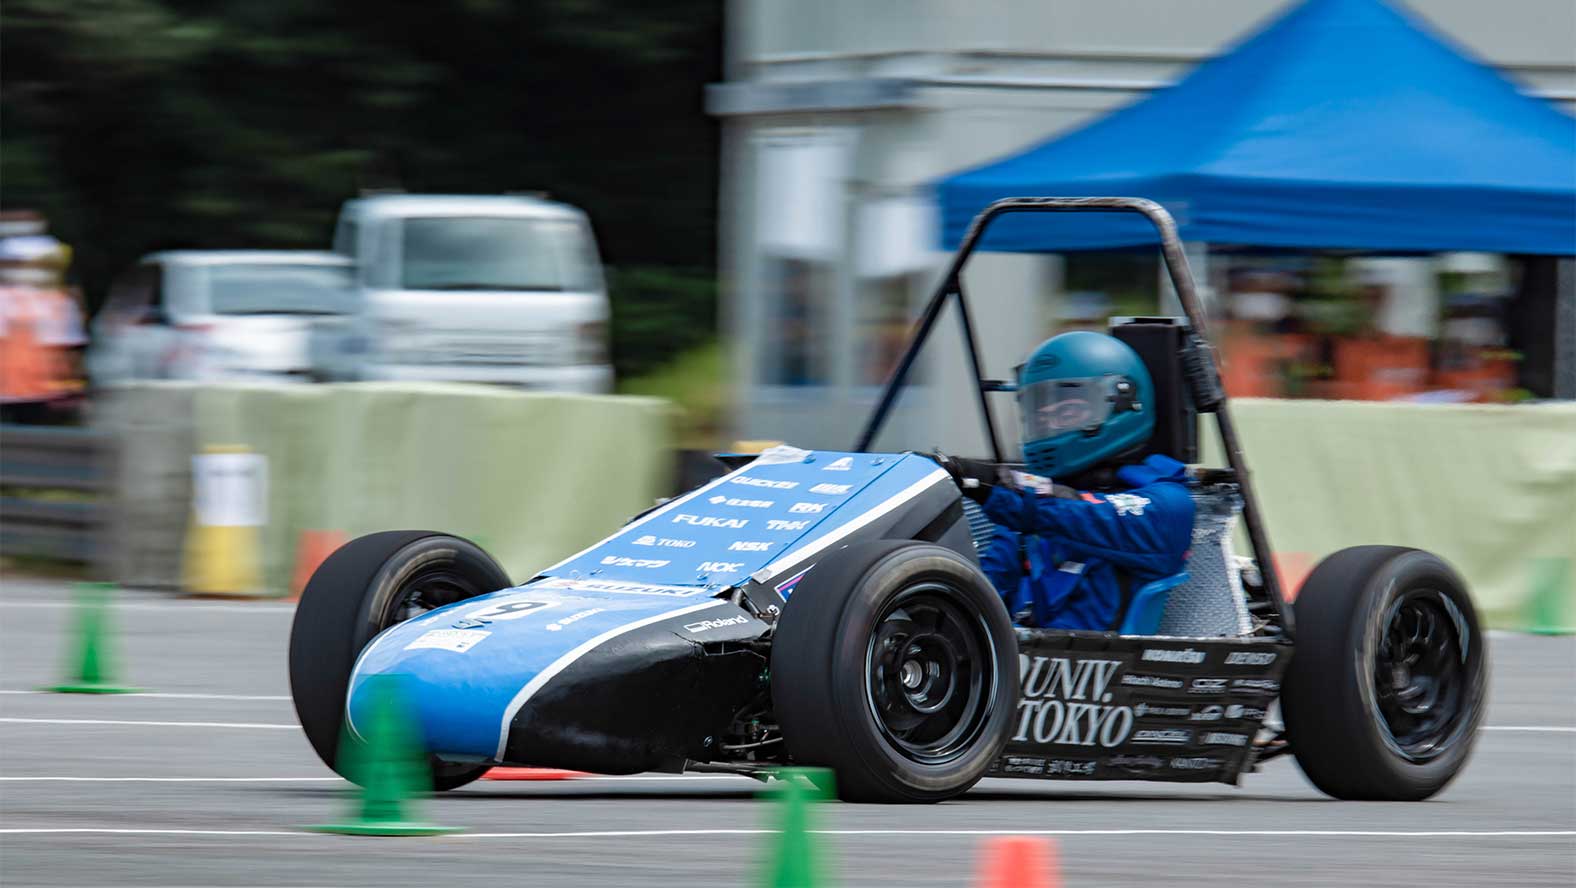 The racing car of the University of Tokyo Formula Factory